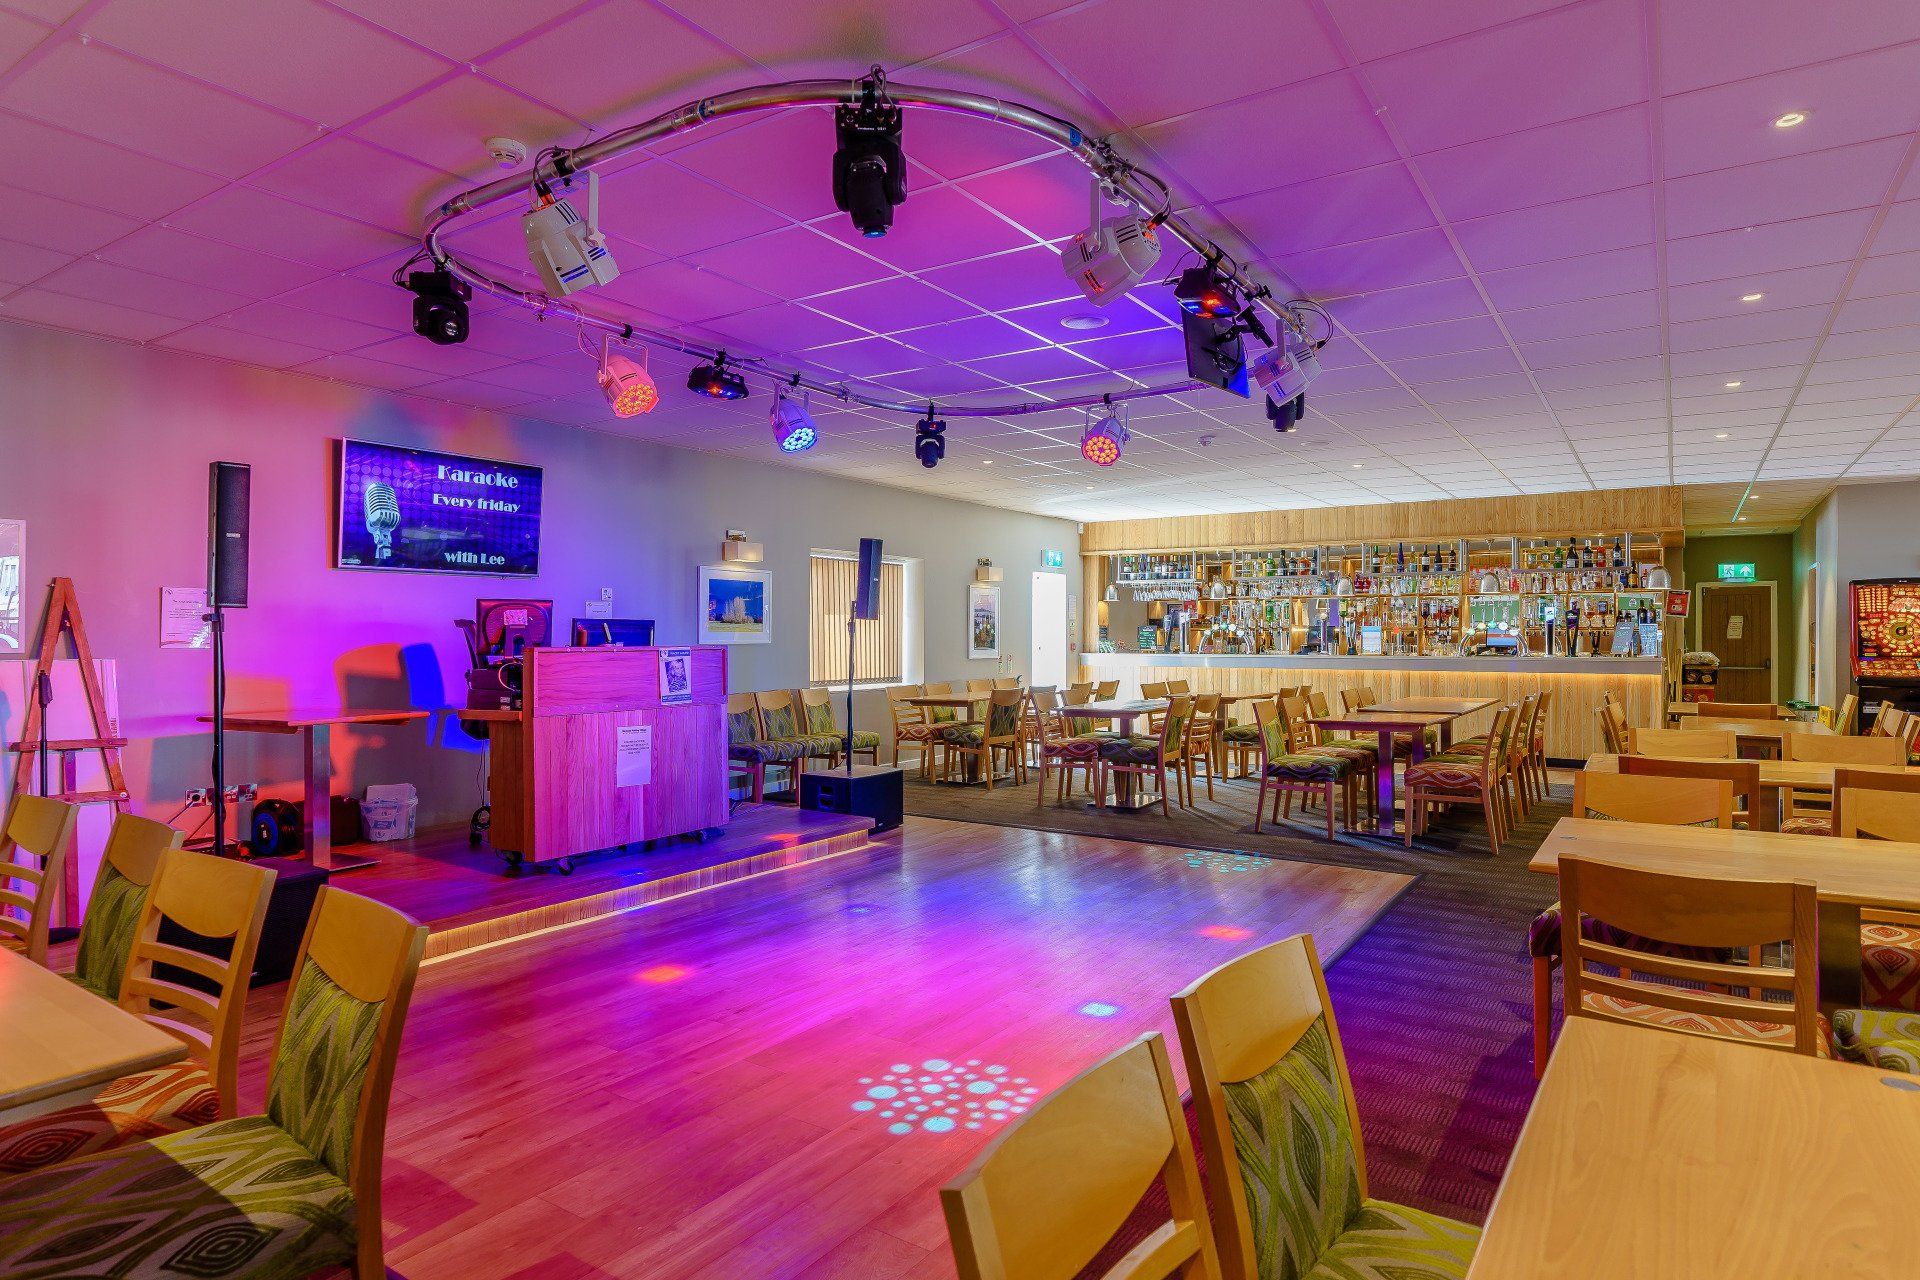 Dance floor with the lights on at our holiday park near Weston-super-Mare.